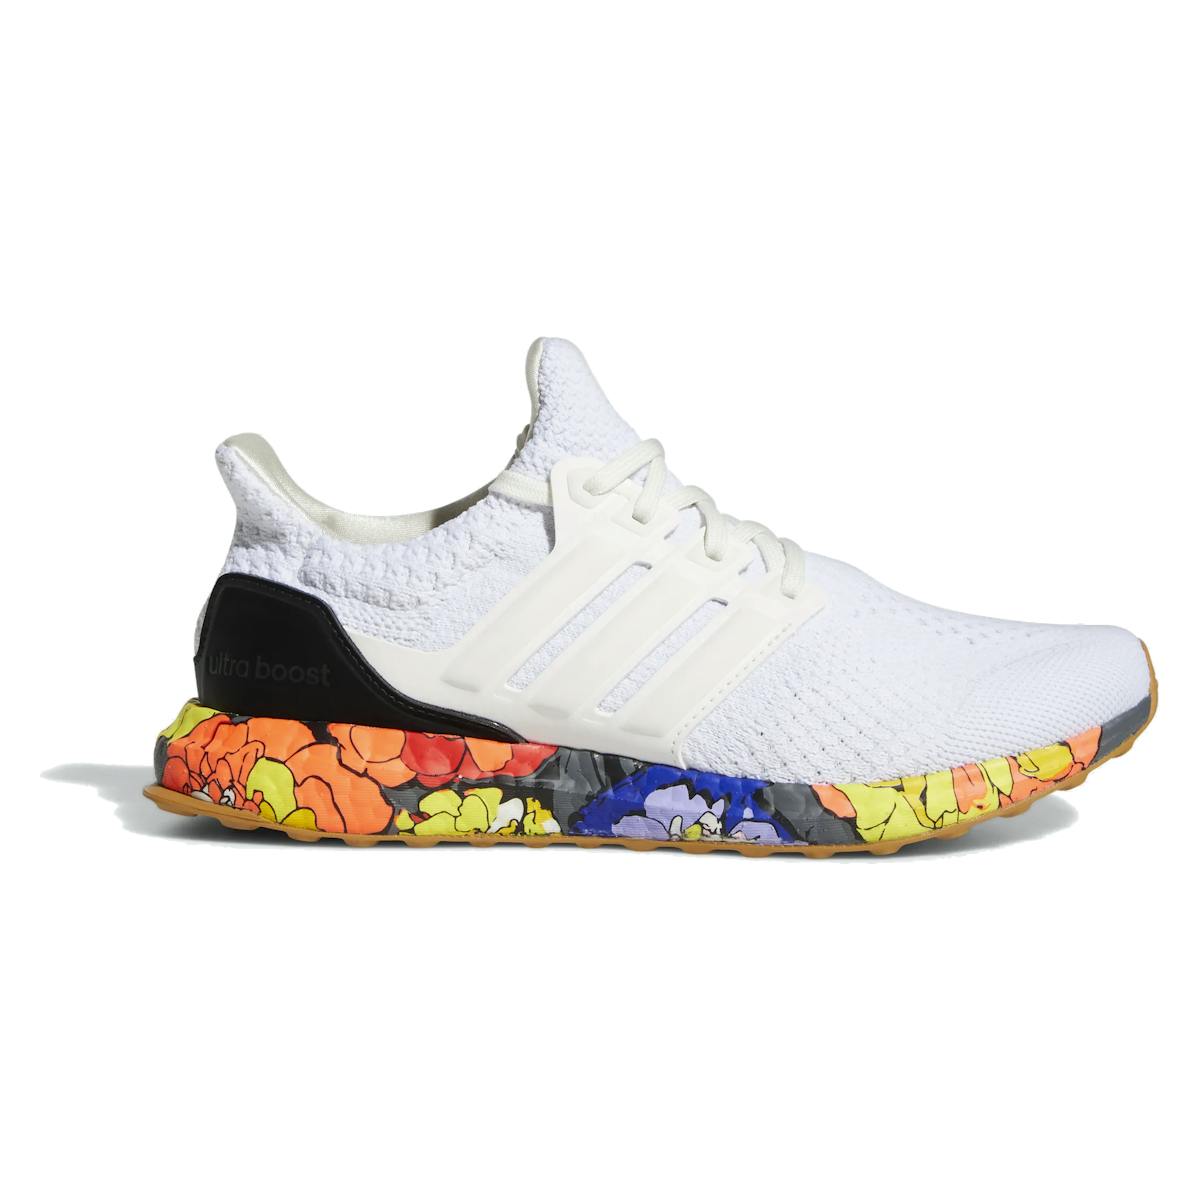 adidas Ultra Boost 5.0 DNA White Floral Midsole (W)